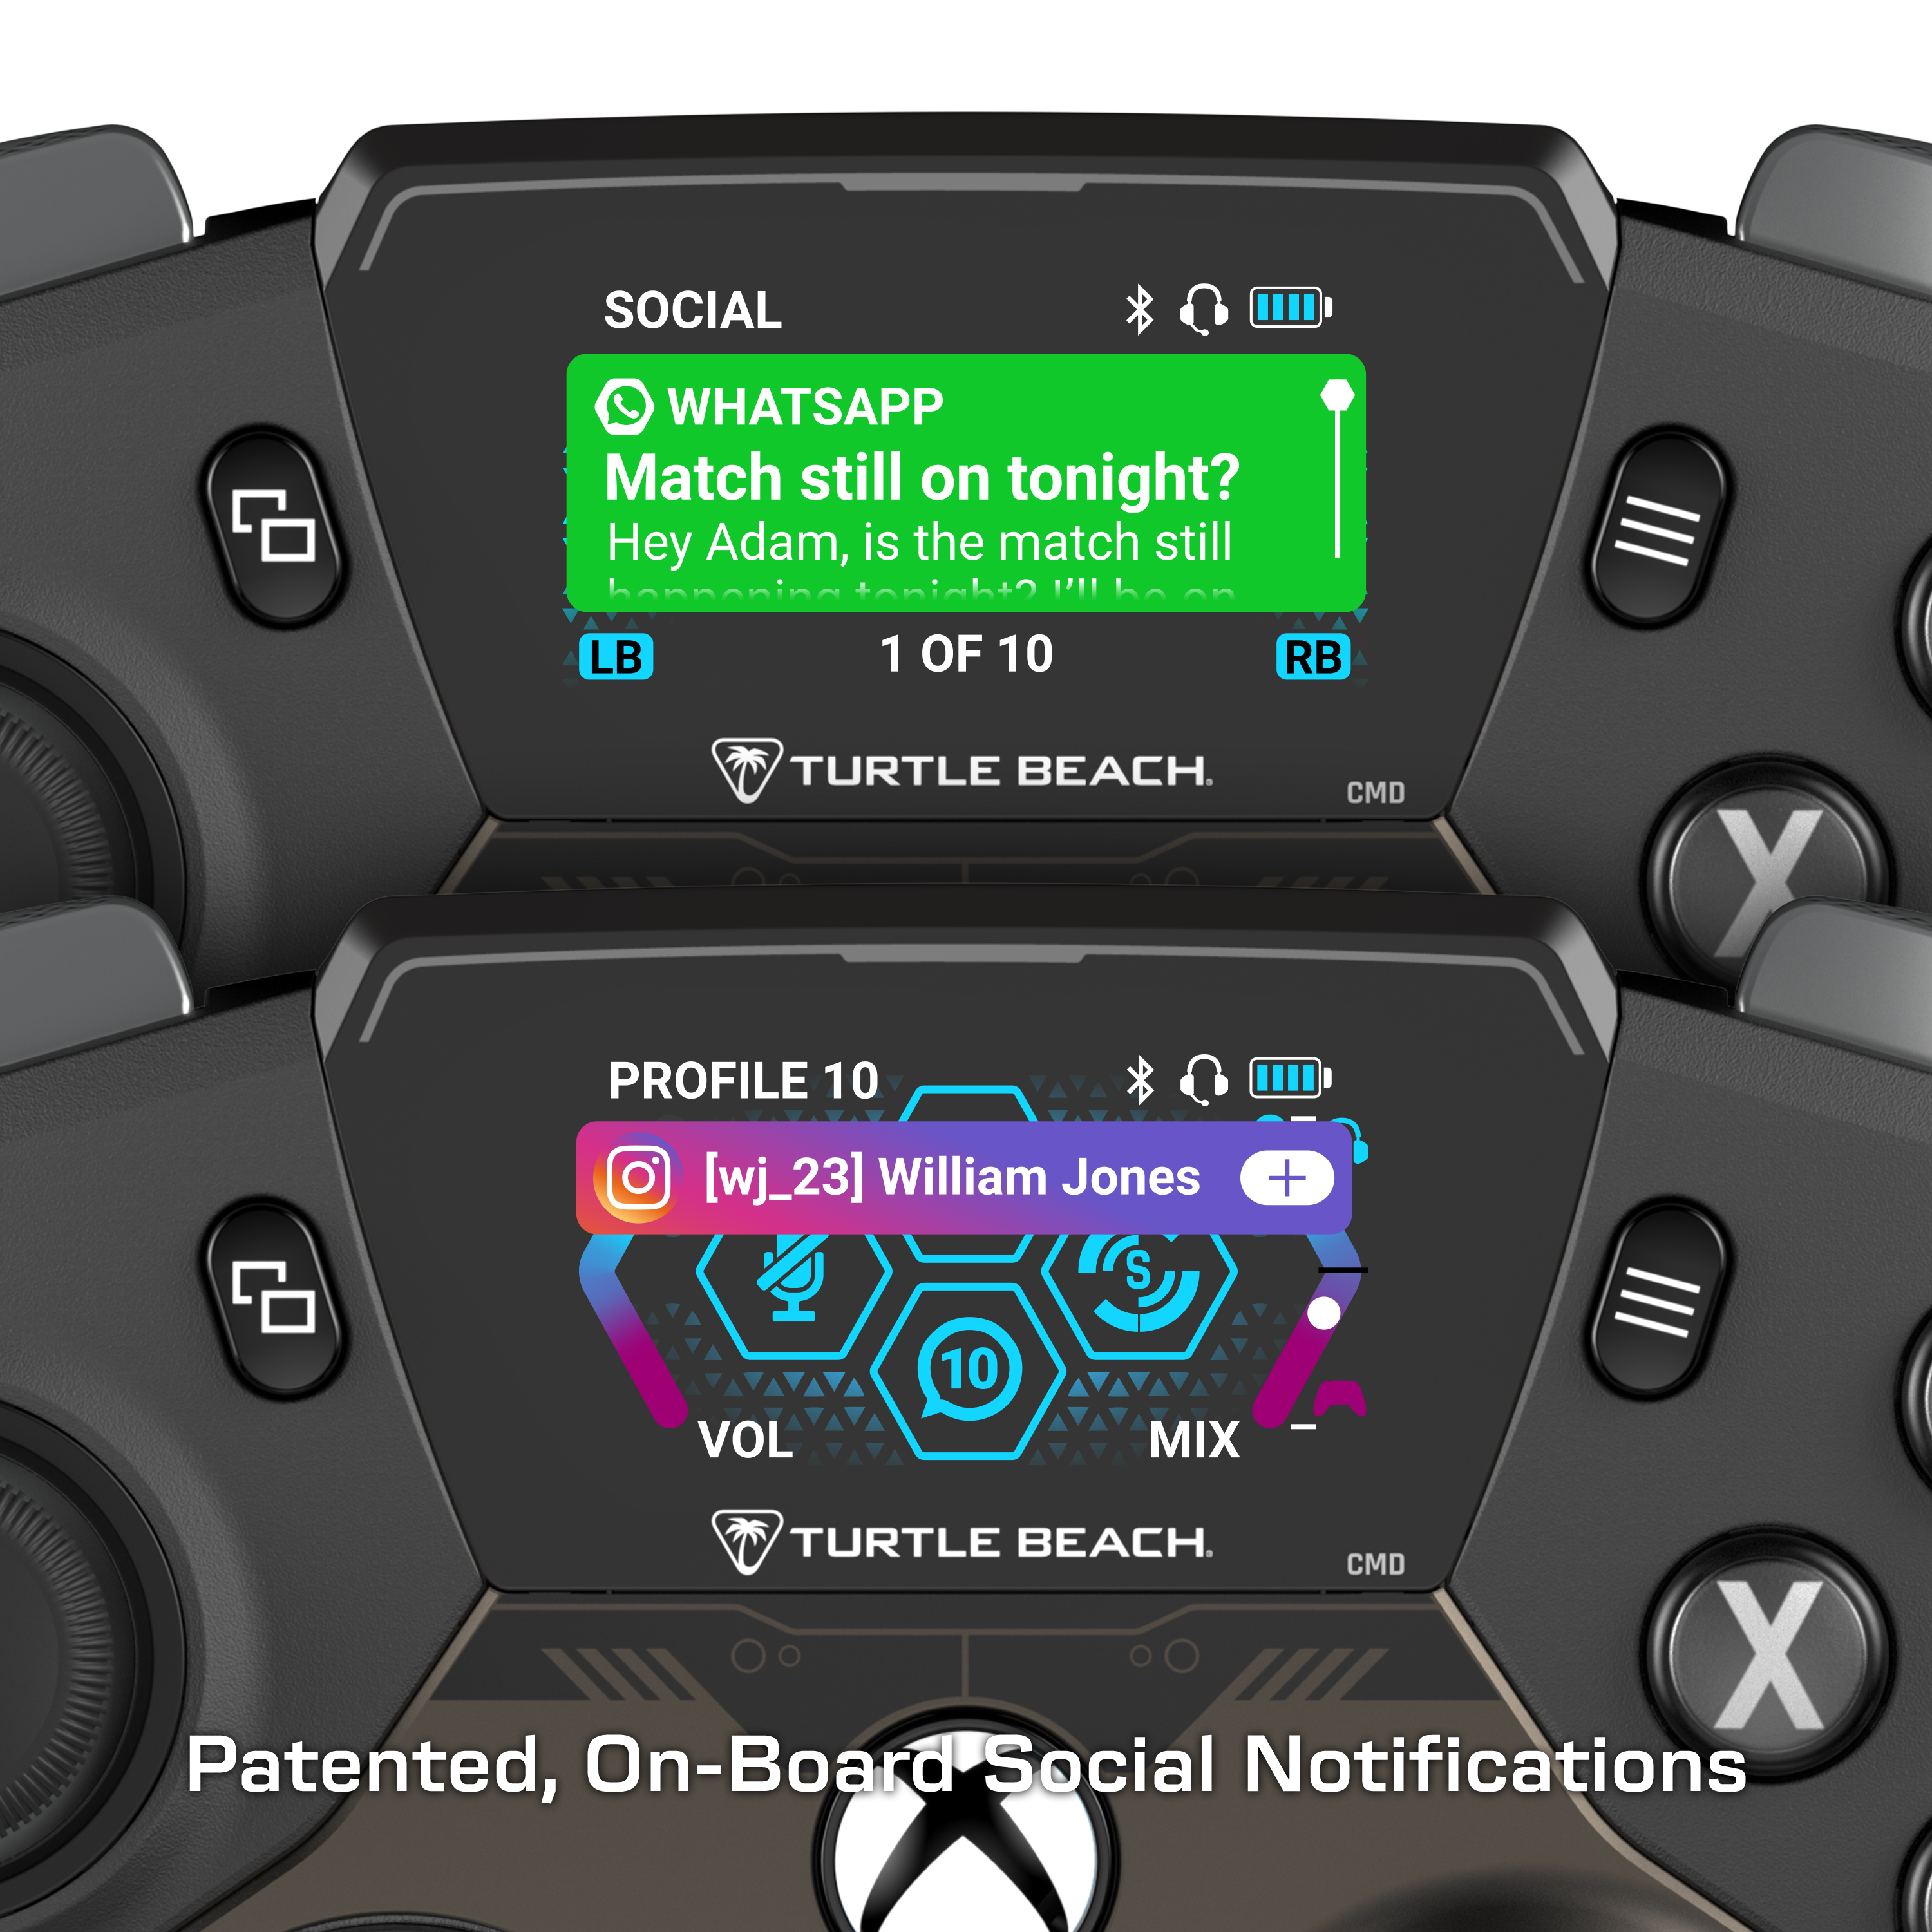 Designed For Xbox Stealth Ultra Wireless Controller product image (Turtle Beach)